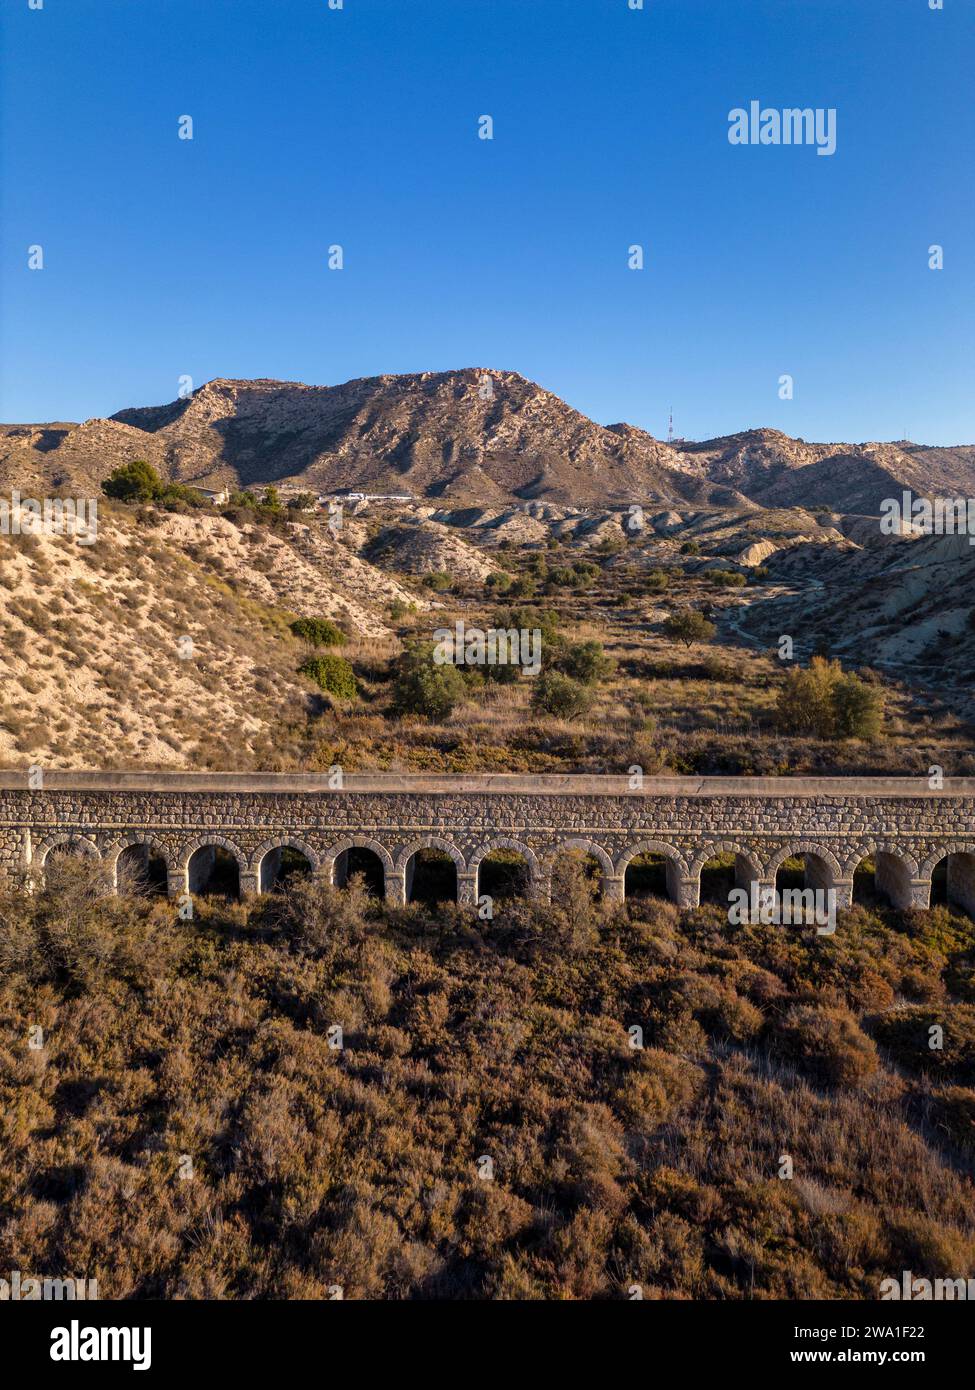 Old water aqueduct near the Elche reservoir, Alicante province, Costa Blanca, Spain - stock photo Stock Photo